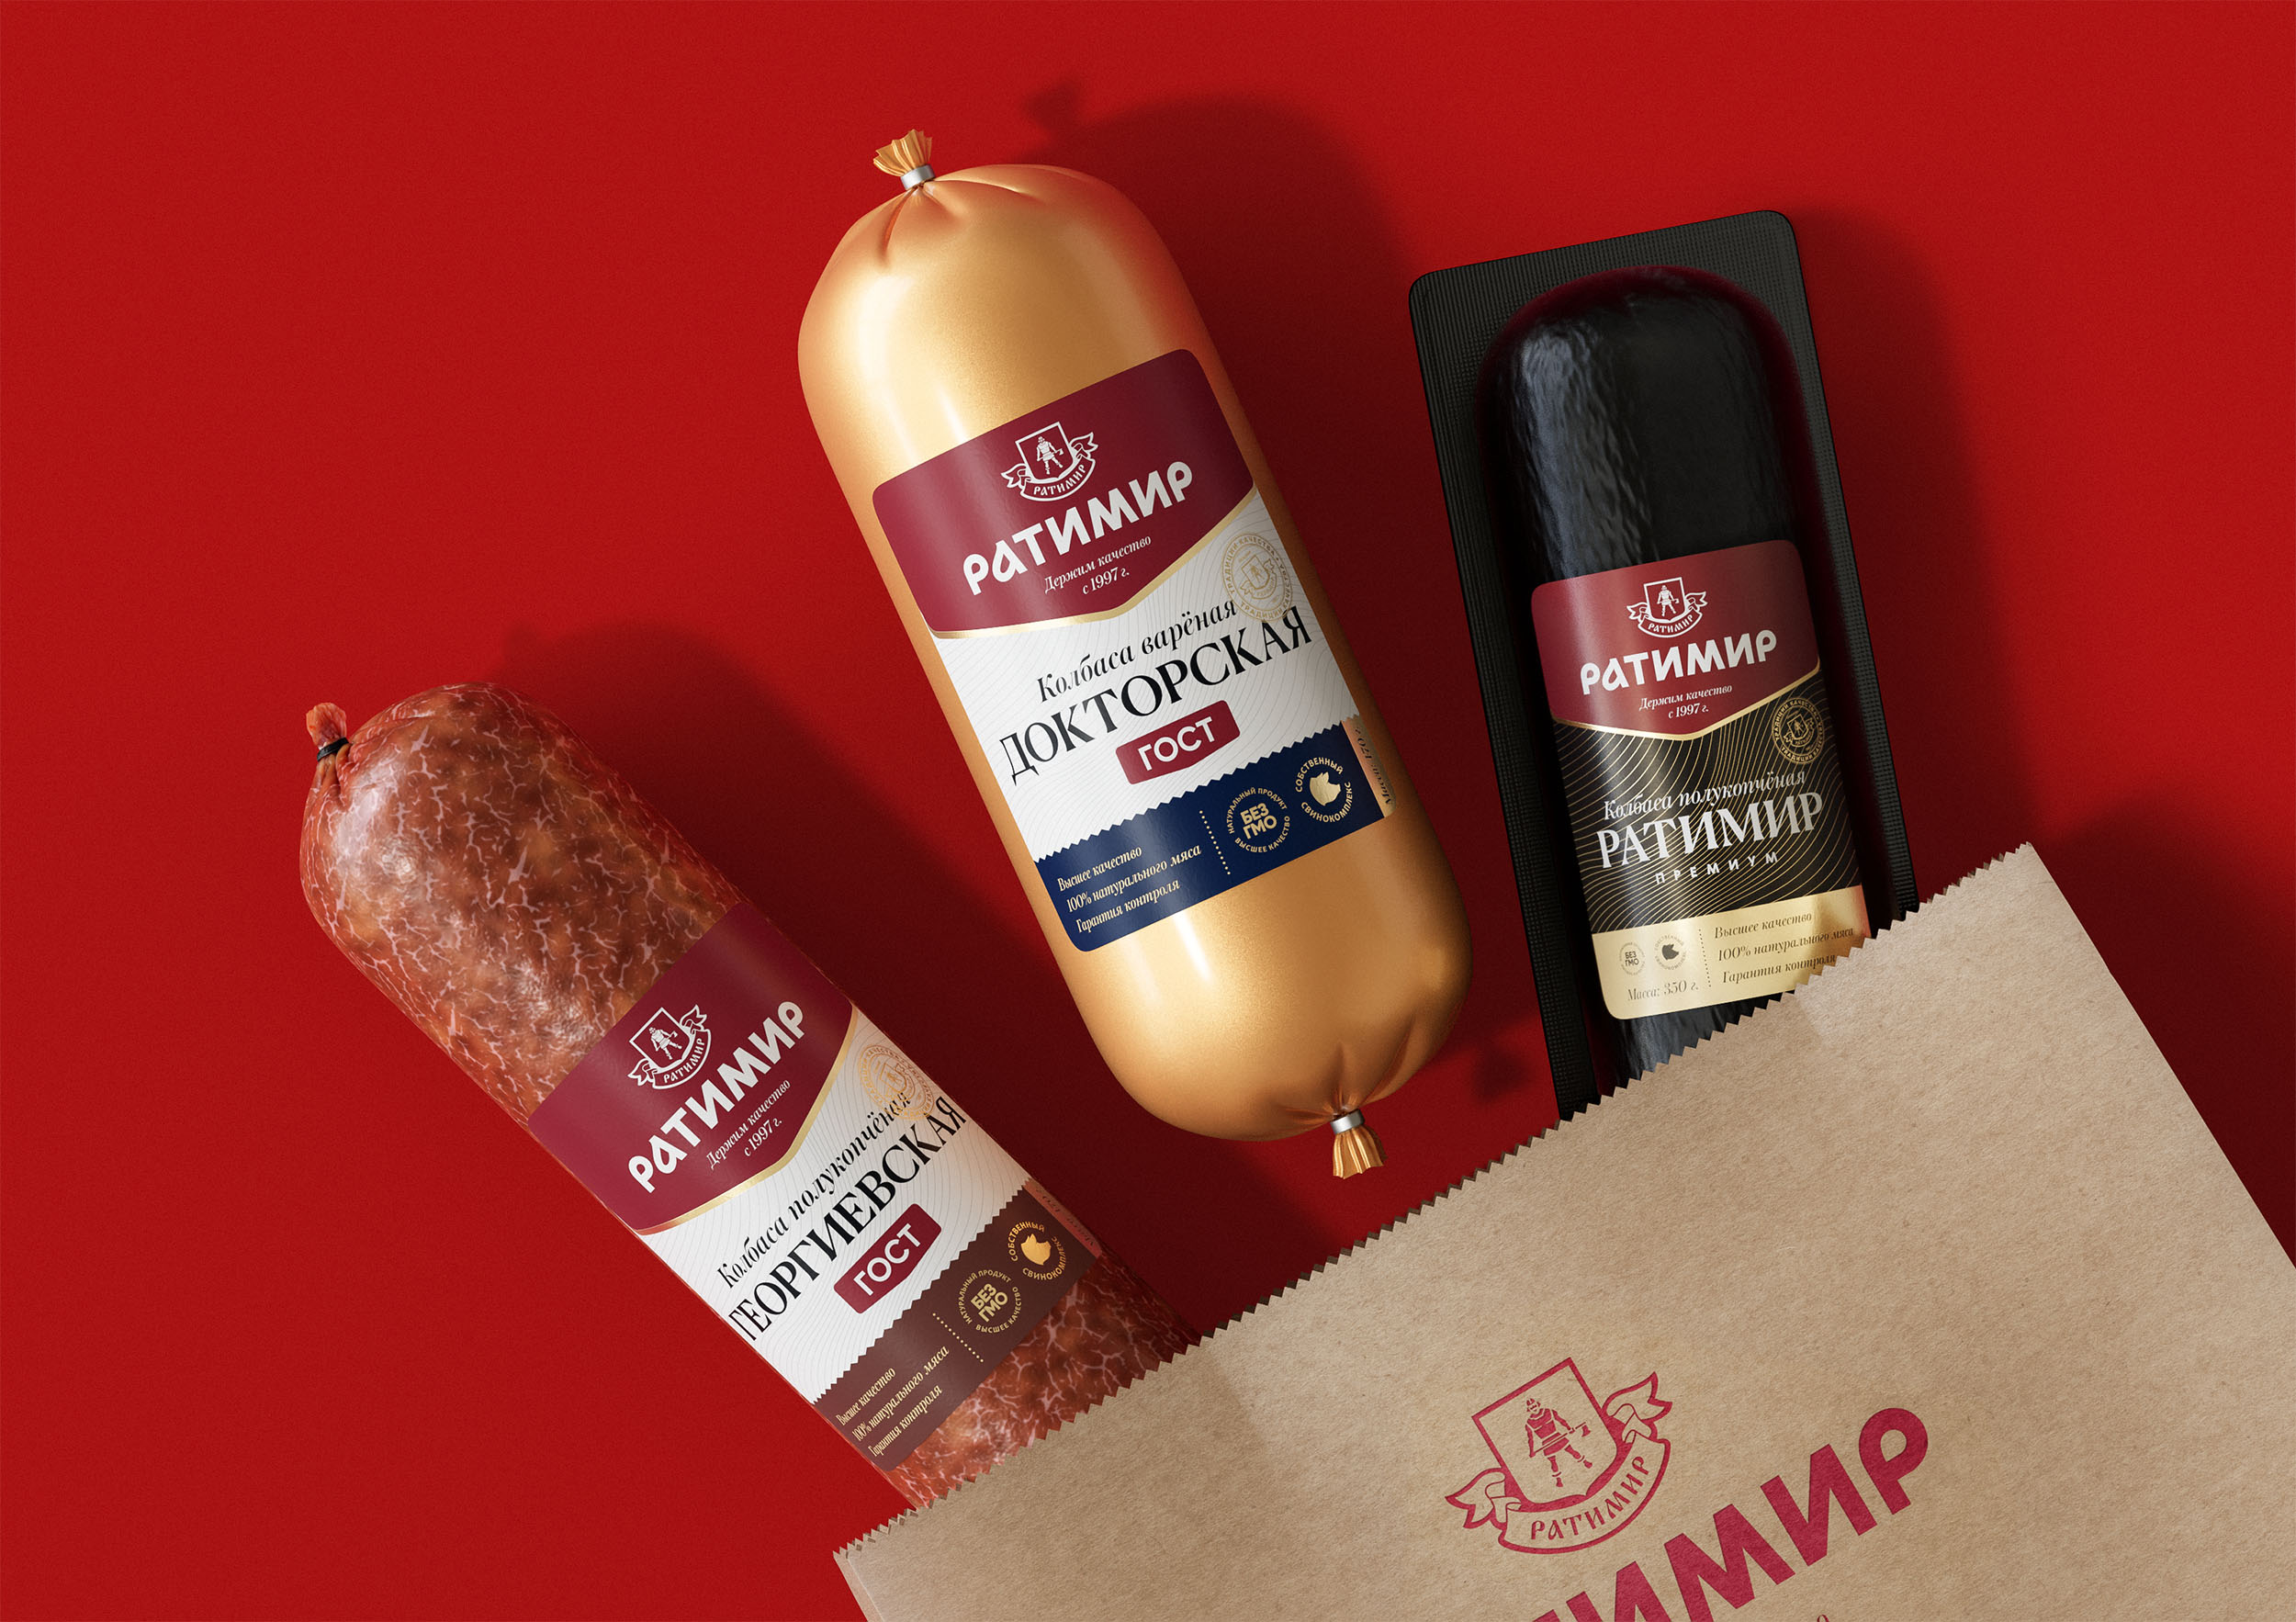 Epic Redesign: Ohmybrand Agency Unveils Brand Identity and Corporate Style for “Ratimir” Meat Products Brand